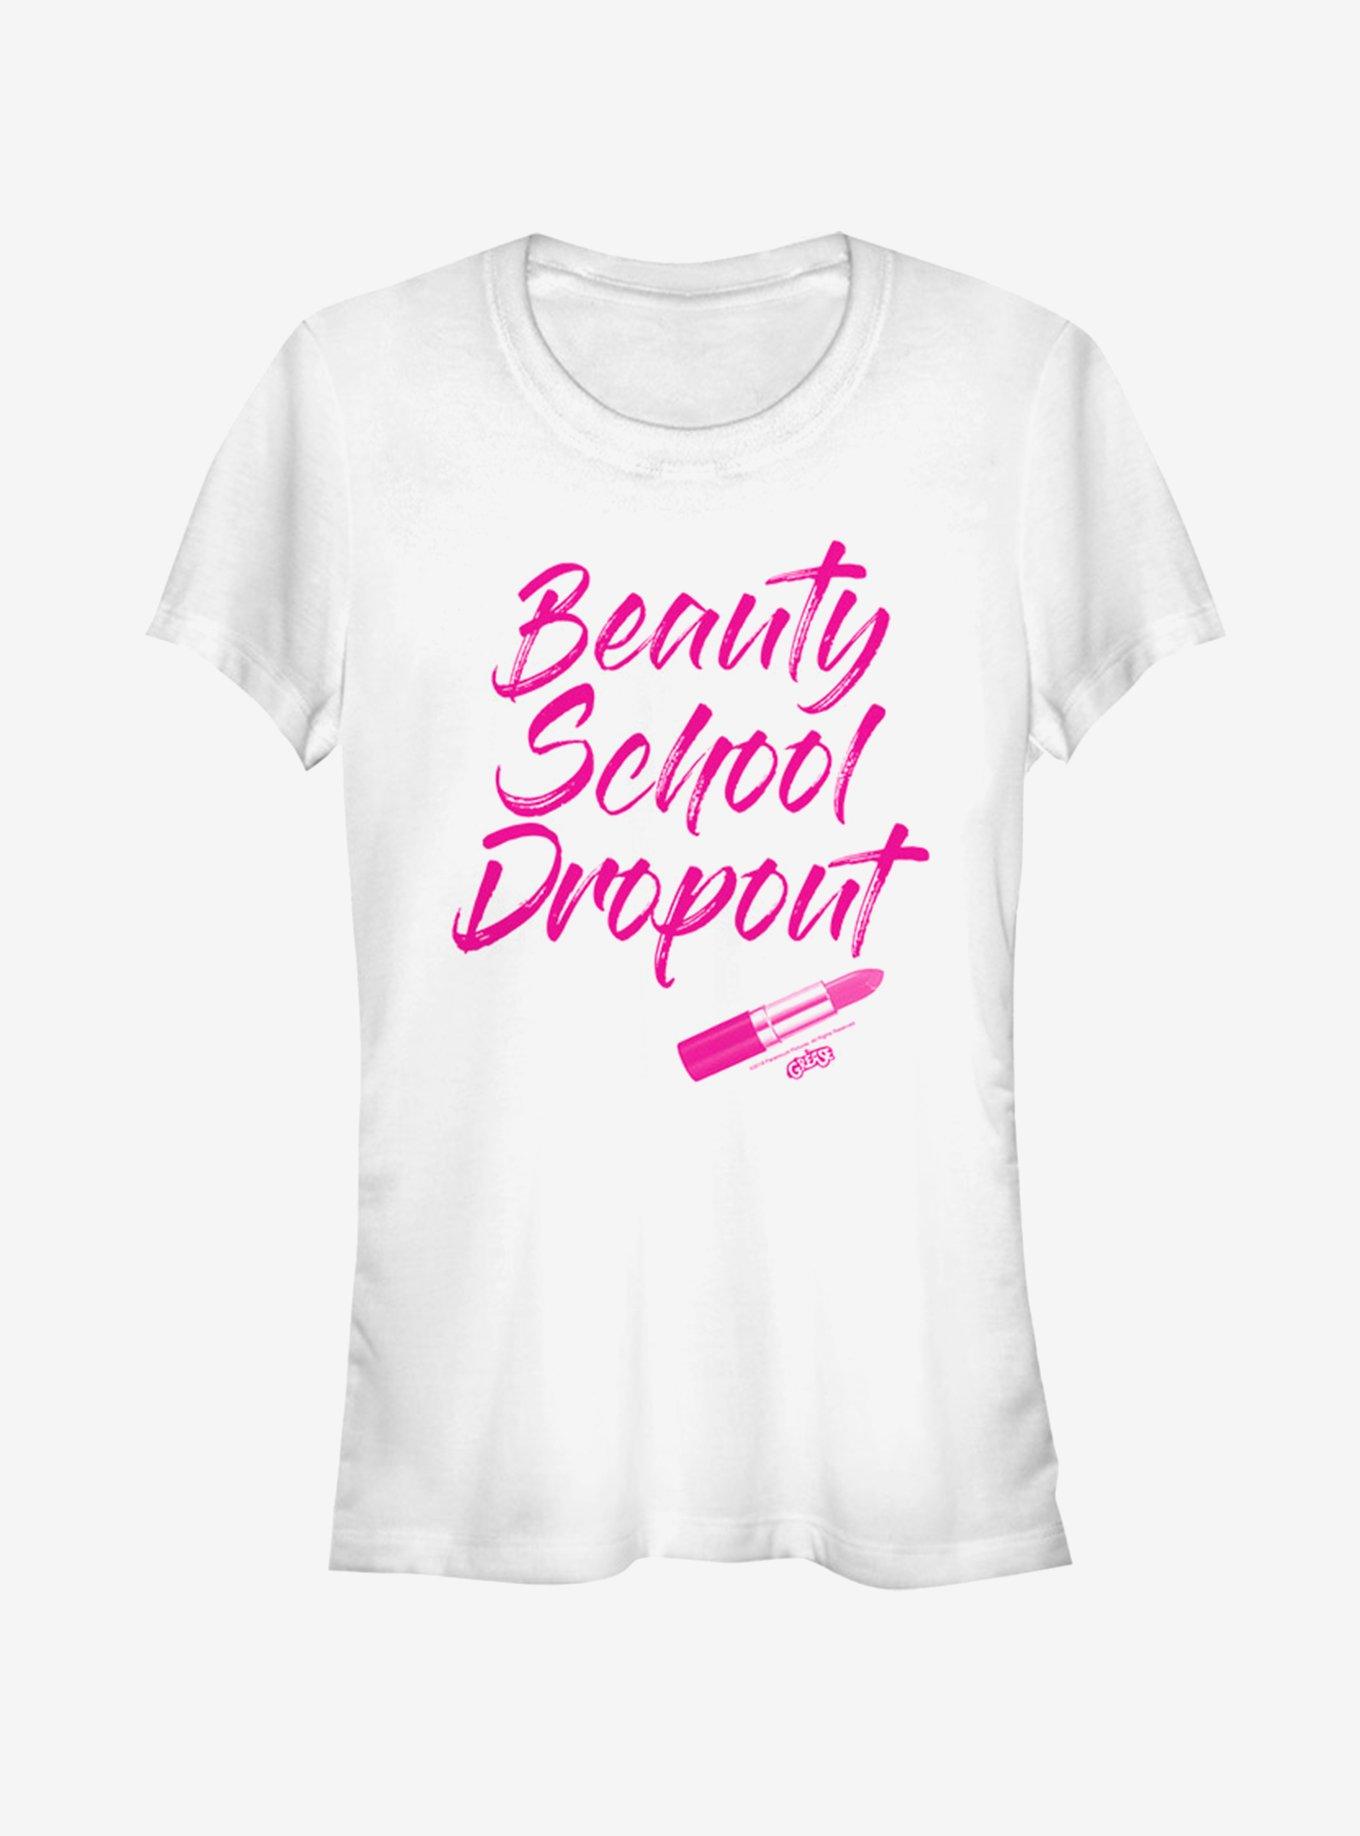 Grease Beauty School Girls T-Shirt, WHITE, hi-res